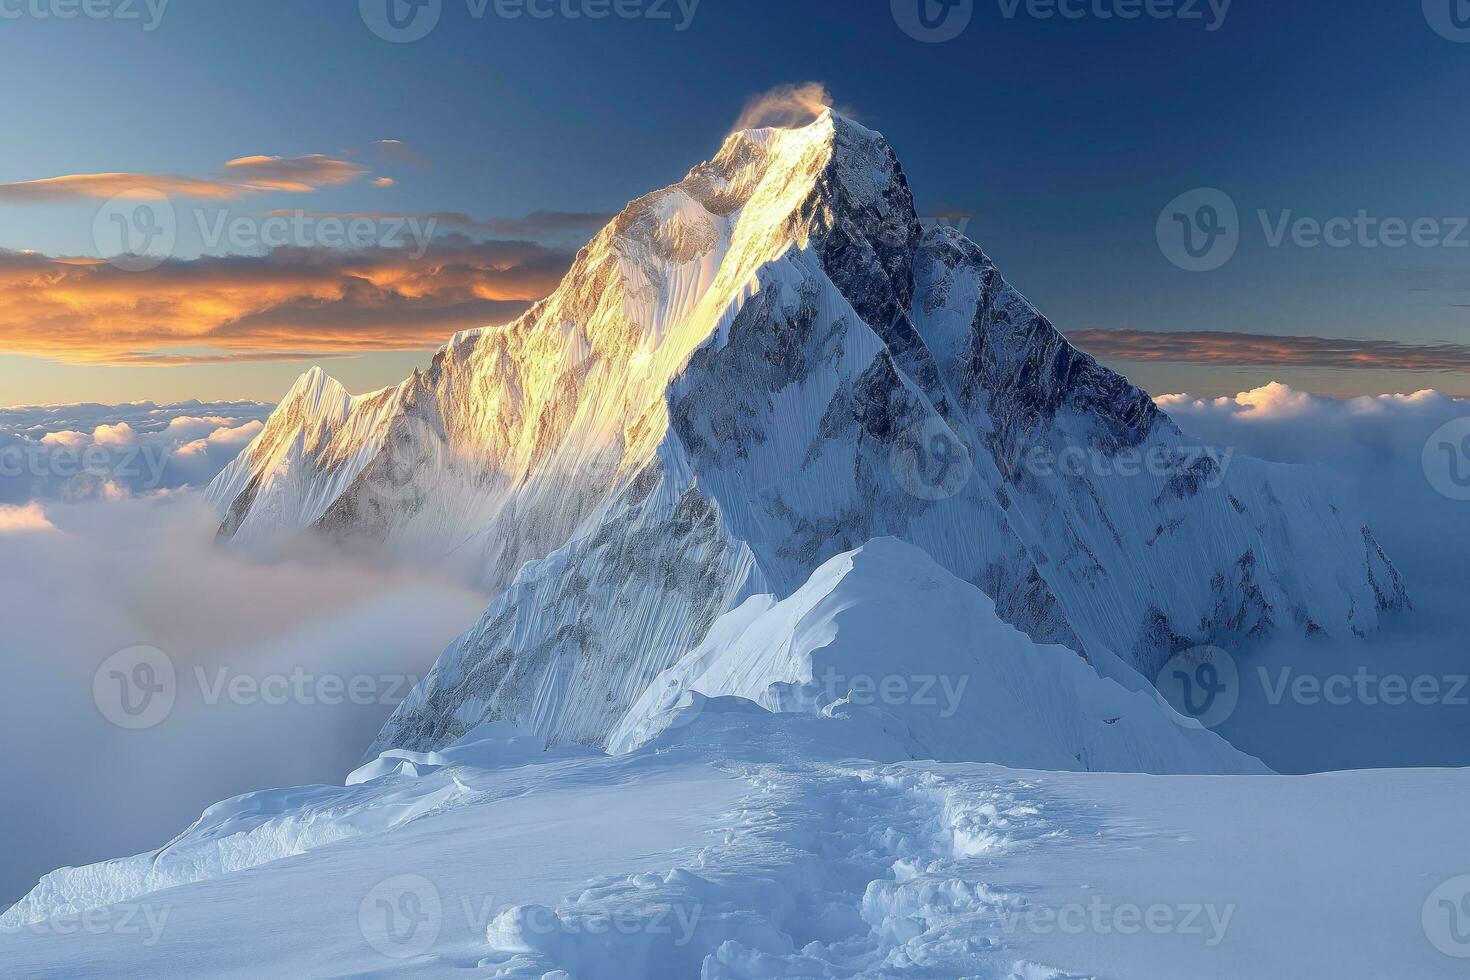 AI generated difficult path to shining peaks, mountain landscape with a climbing path to a distant peak photo